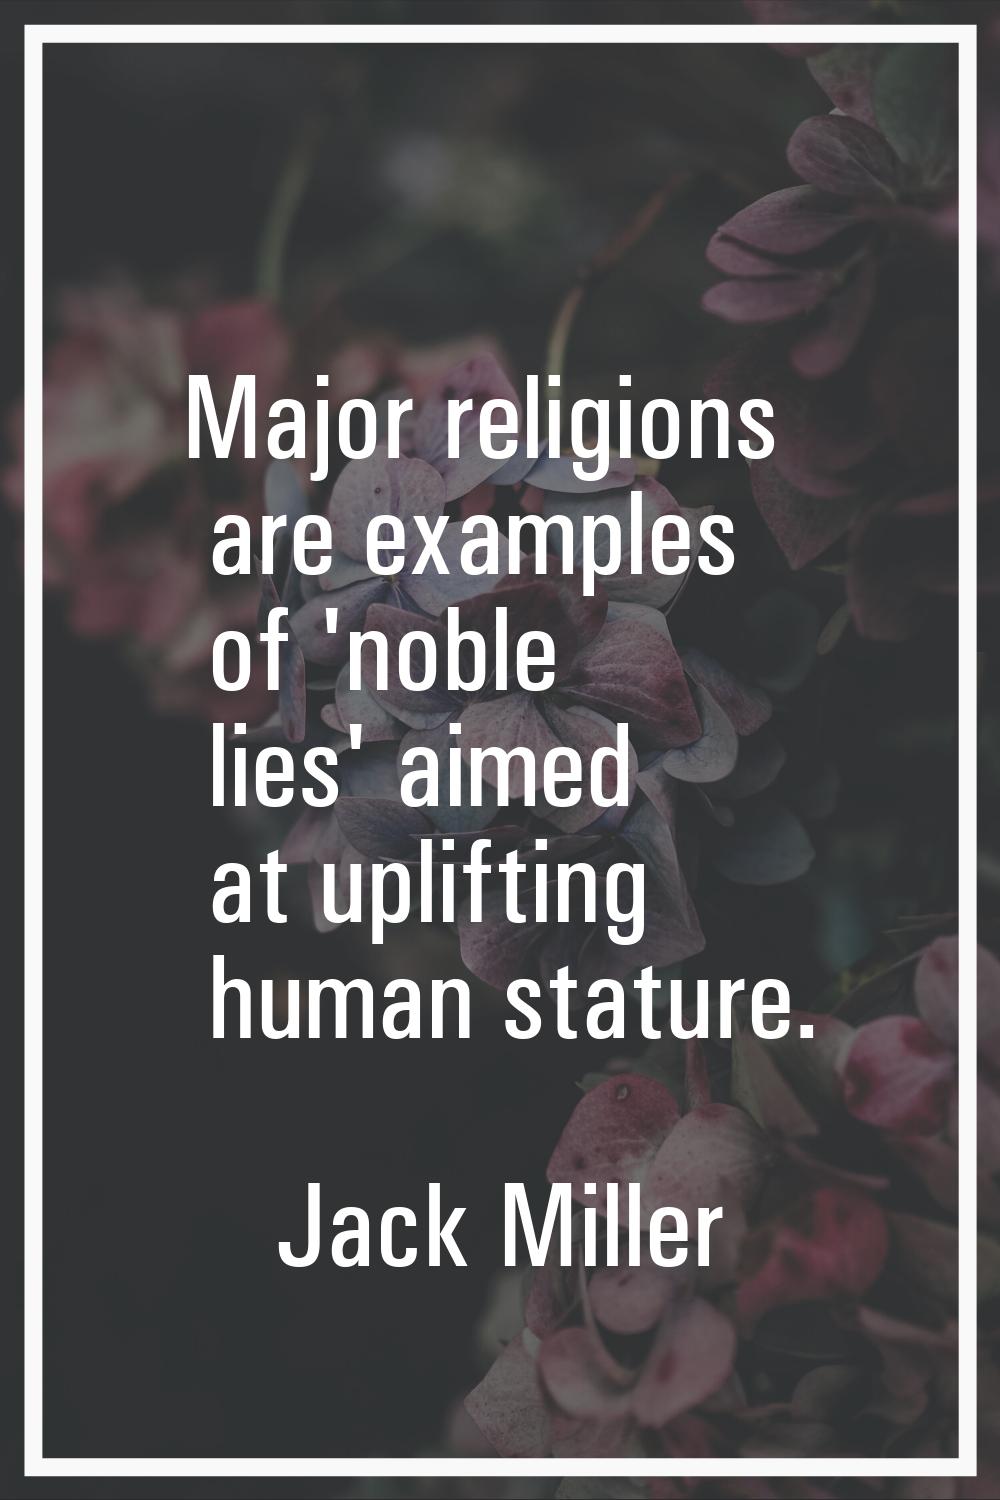 Major religions are examples of 'noble lies' aimed at uplifting human stature.